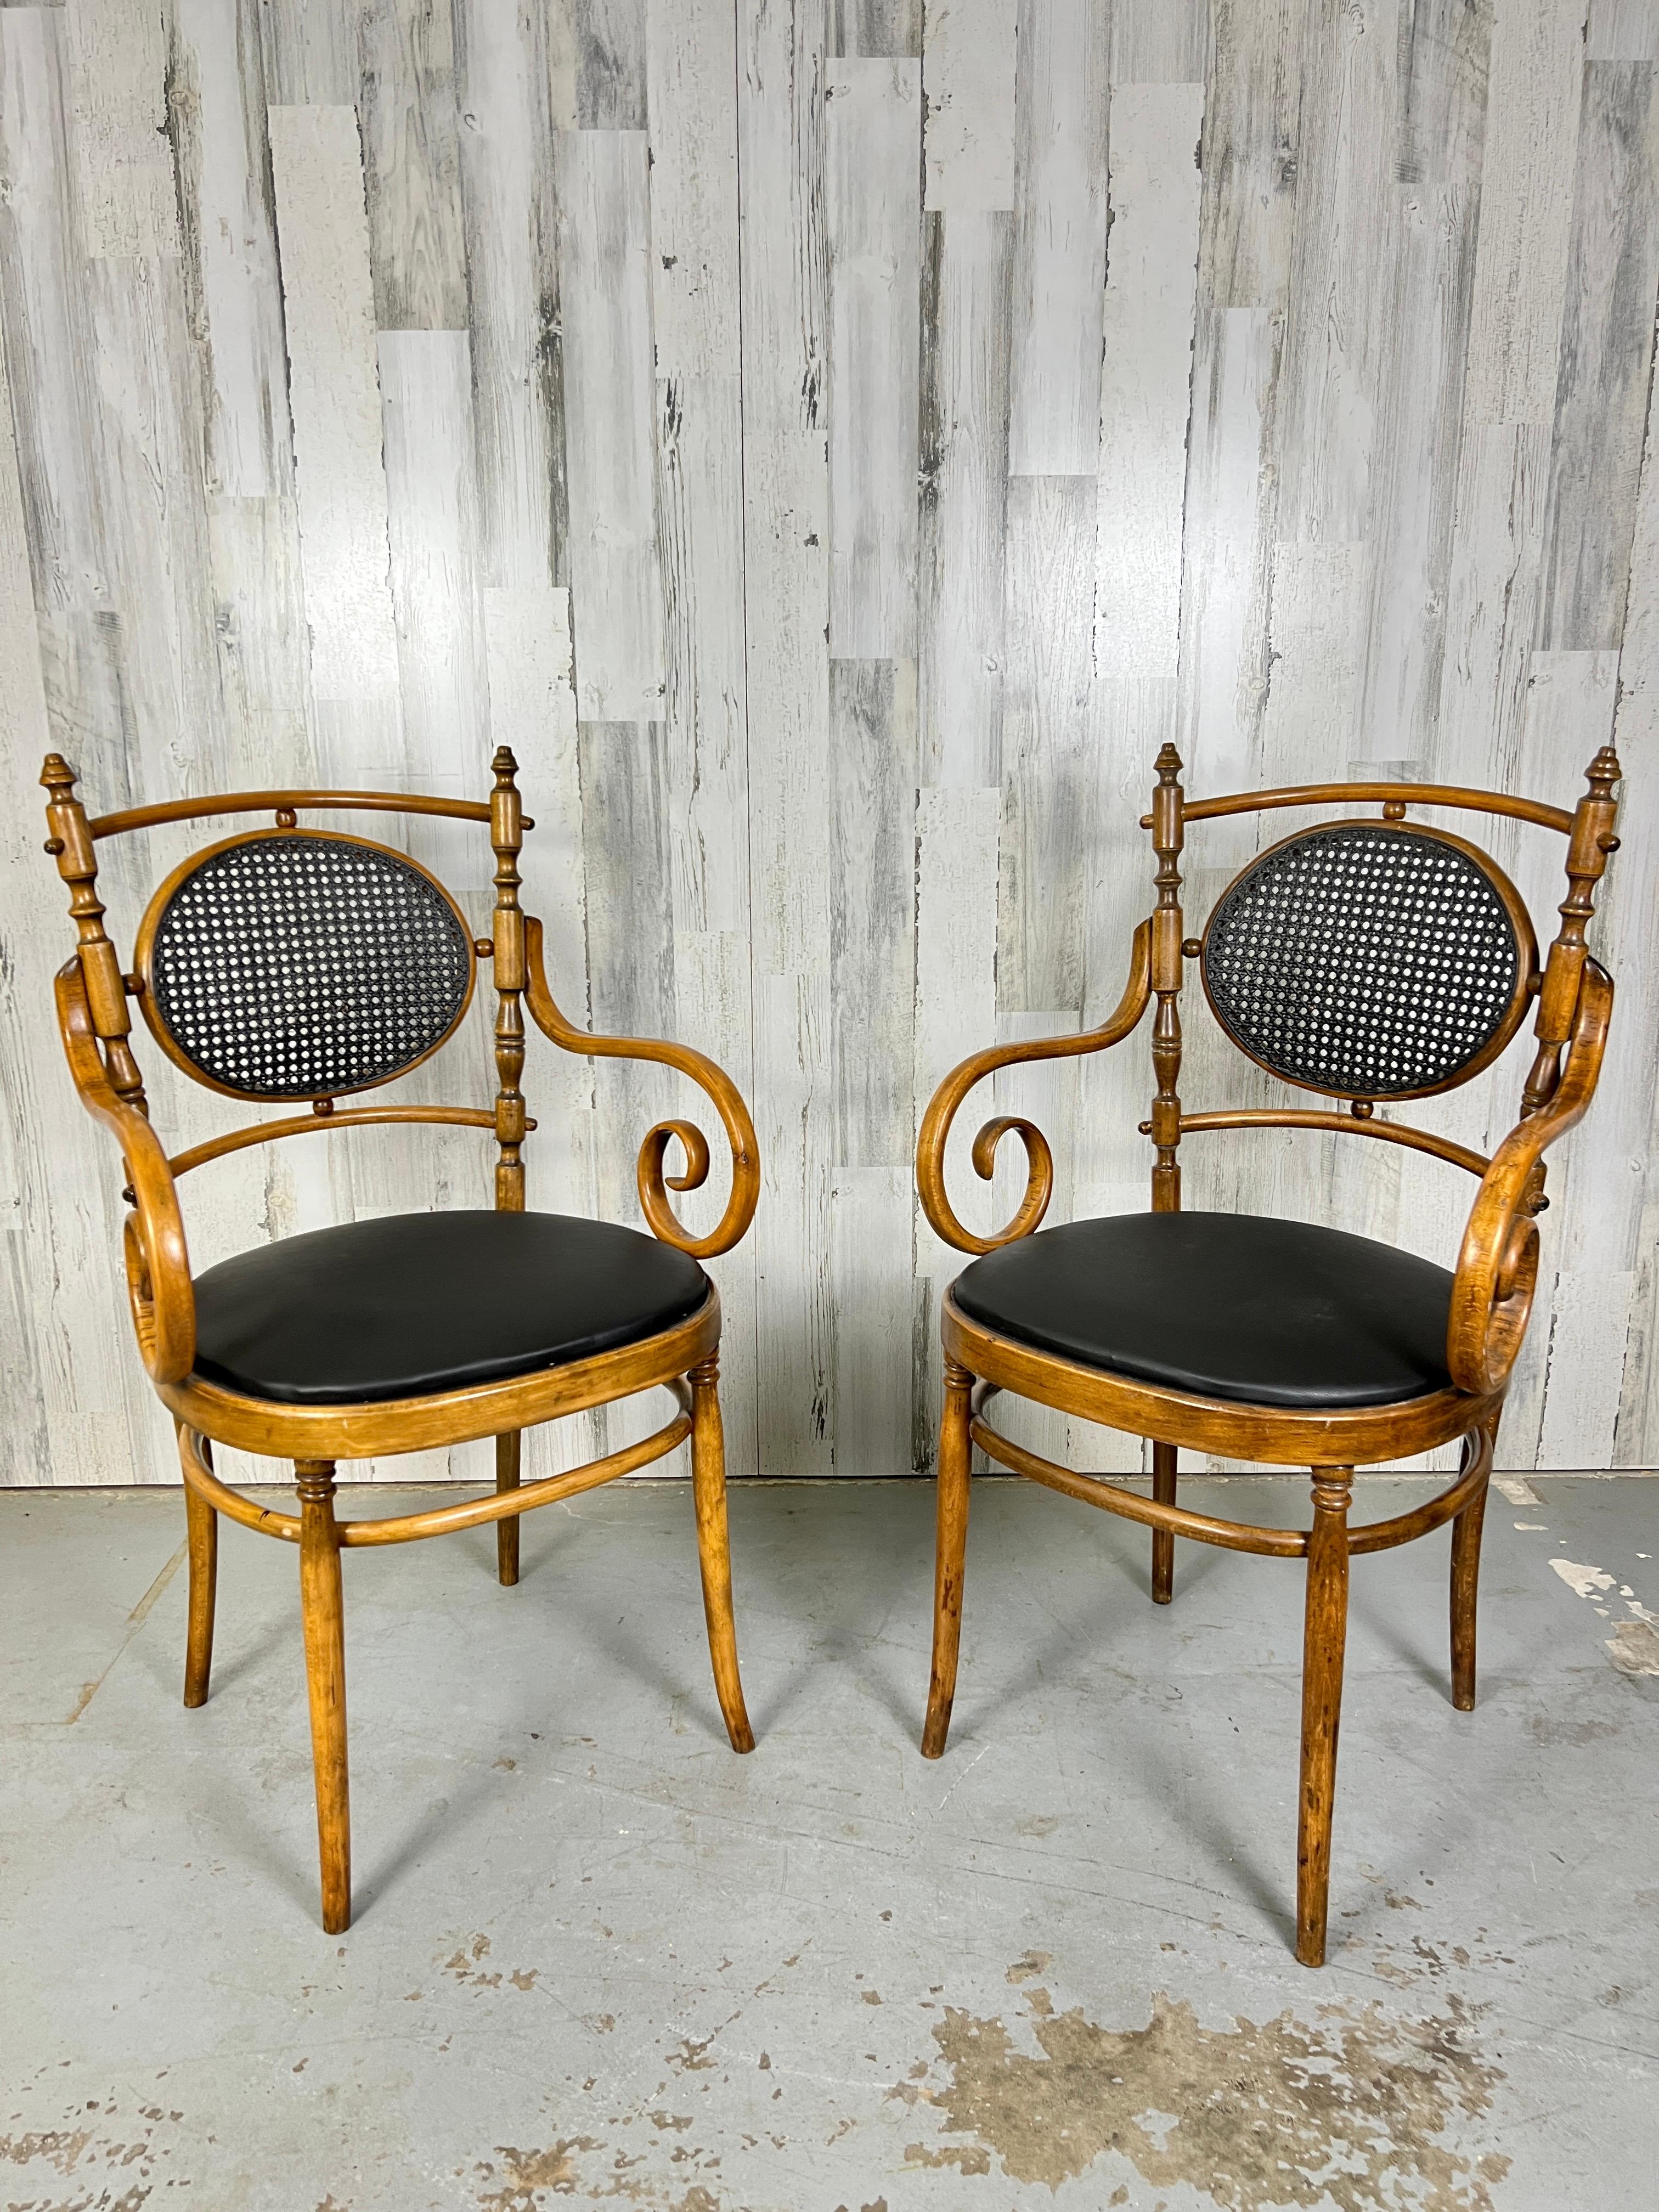 Pair of early bentwood and cane armchairs made by Salvatore Leone for Thonet in Modena, Italy. Rare pair of armchairs featuring a transitional style with a turned wood back support and iconic Thonet 